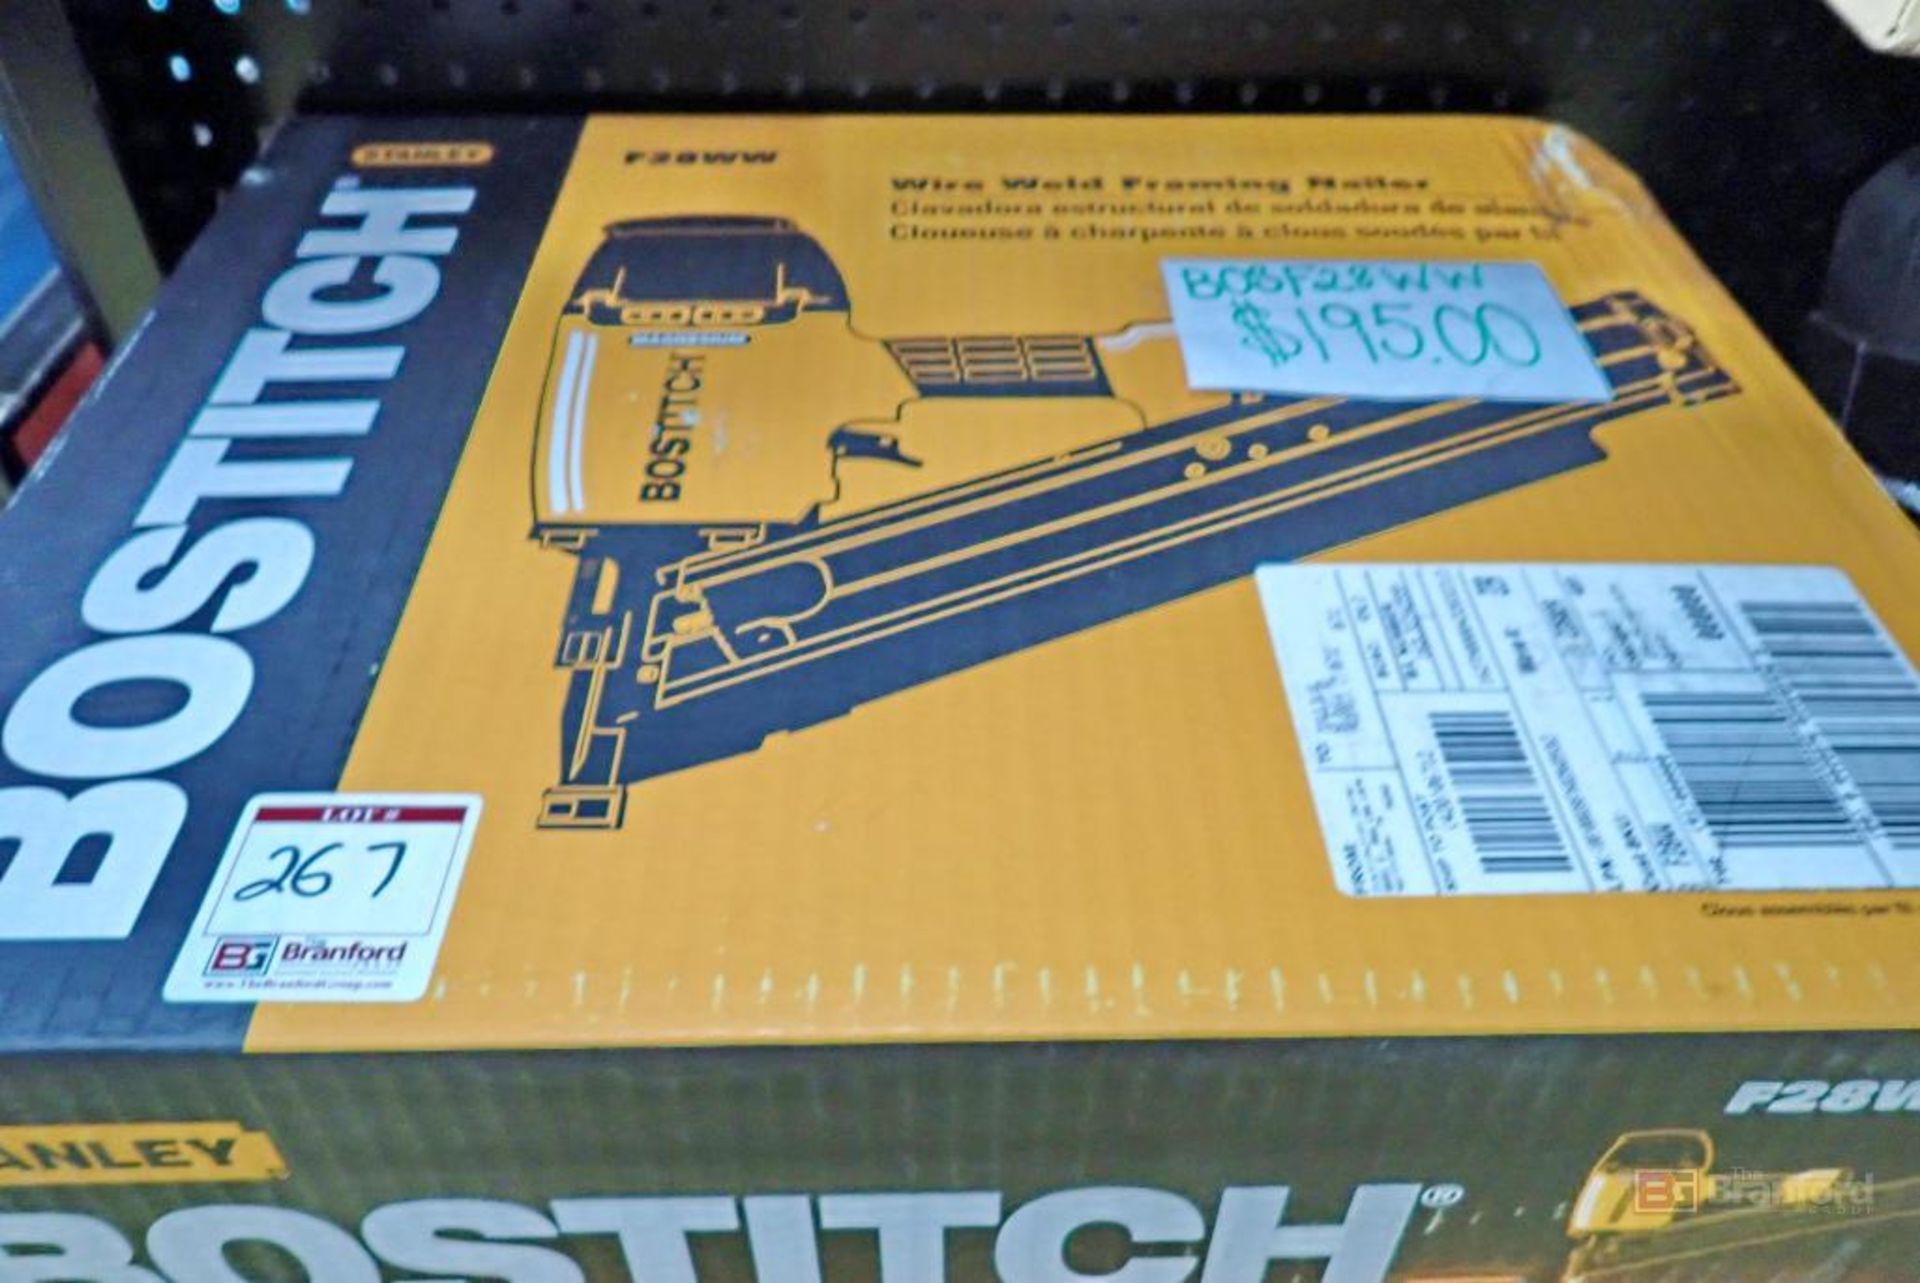 Bostitch F28WW Wire Weld Framing Nailer - Image 2 of 5